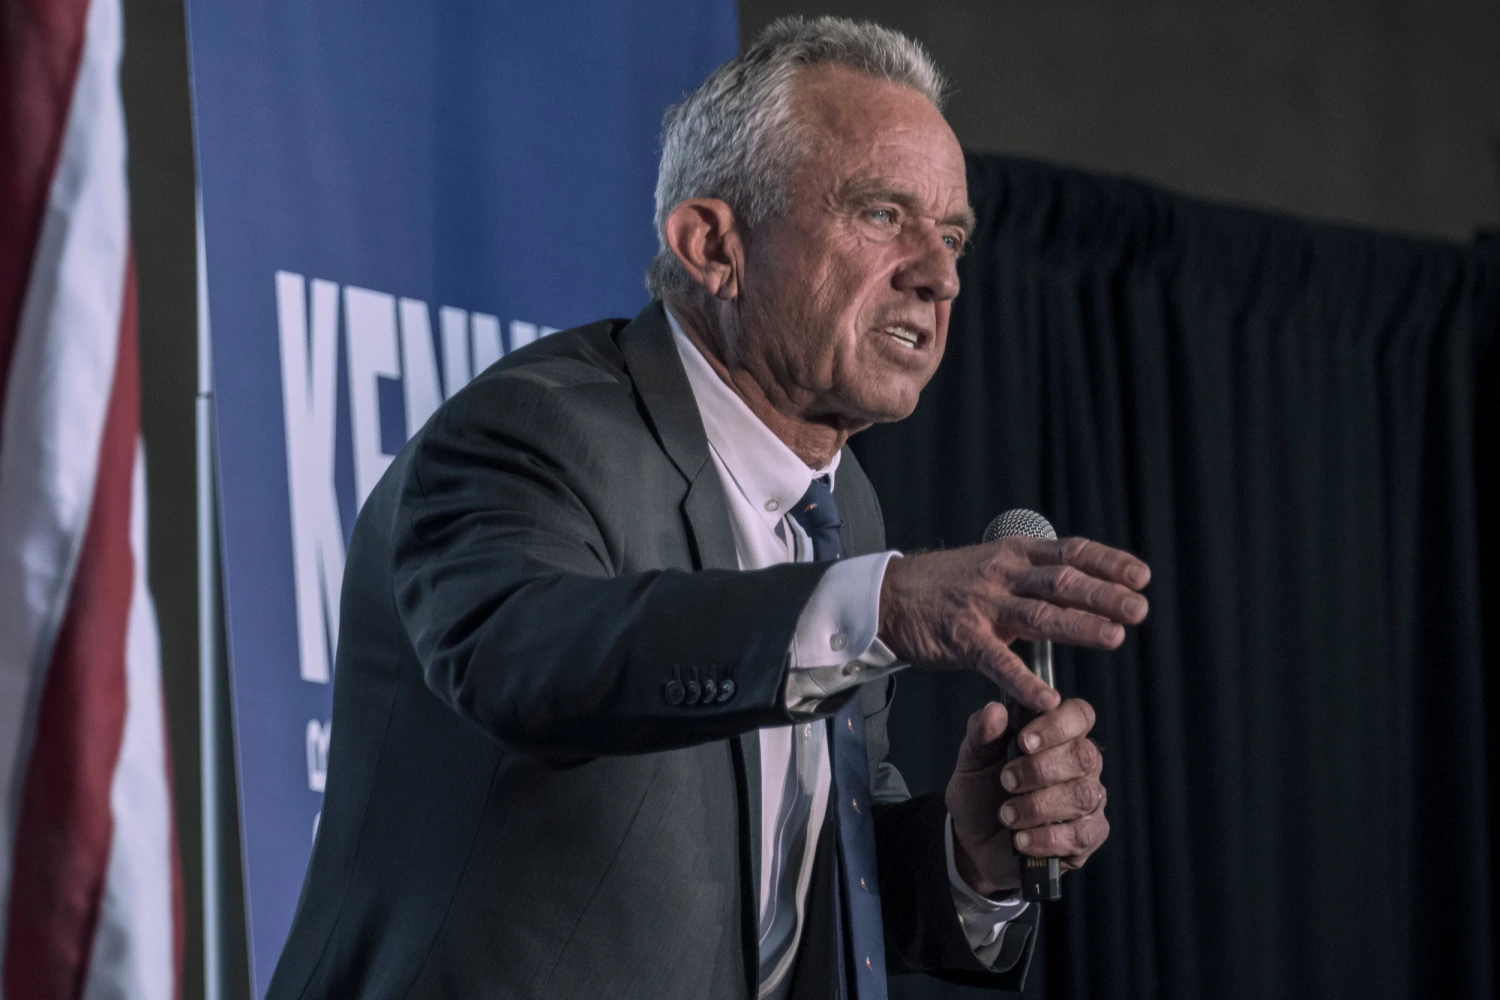 Republican voters show more favorable view of Robert F. Kennedy Jr. (Credits: NBC News)